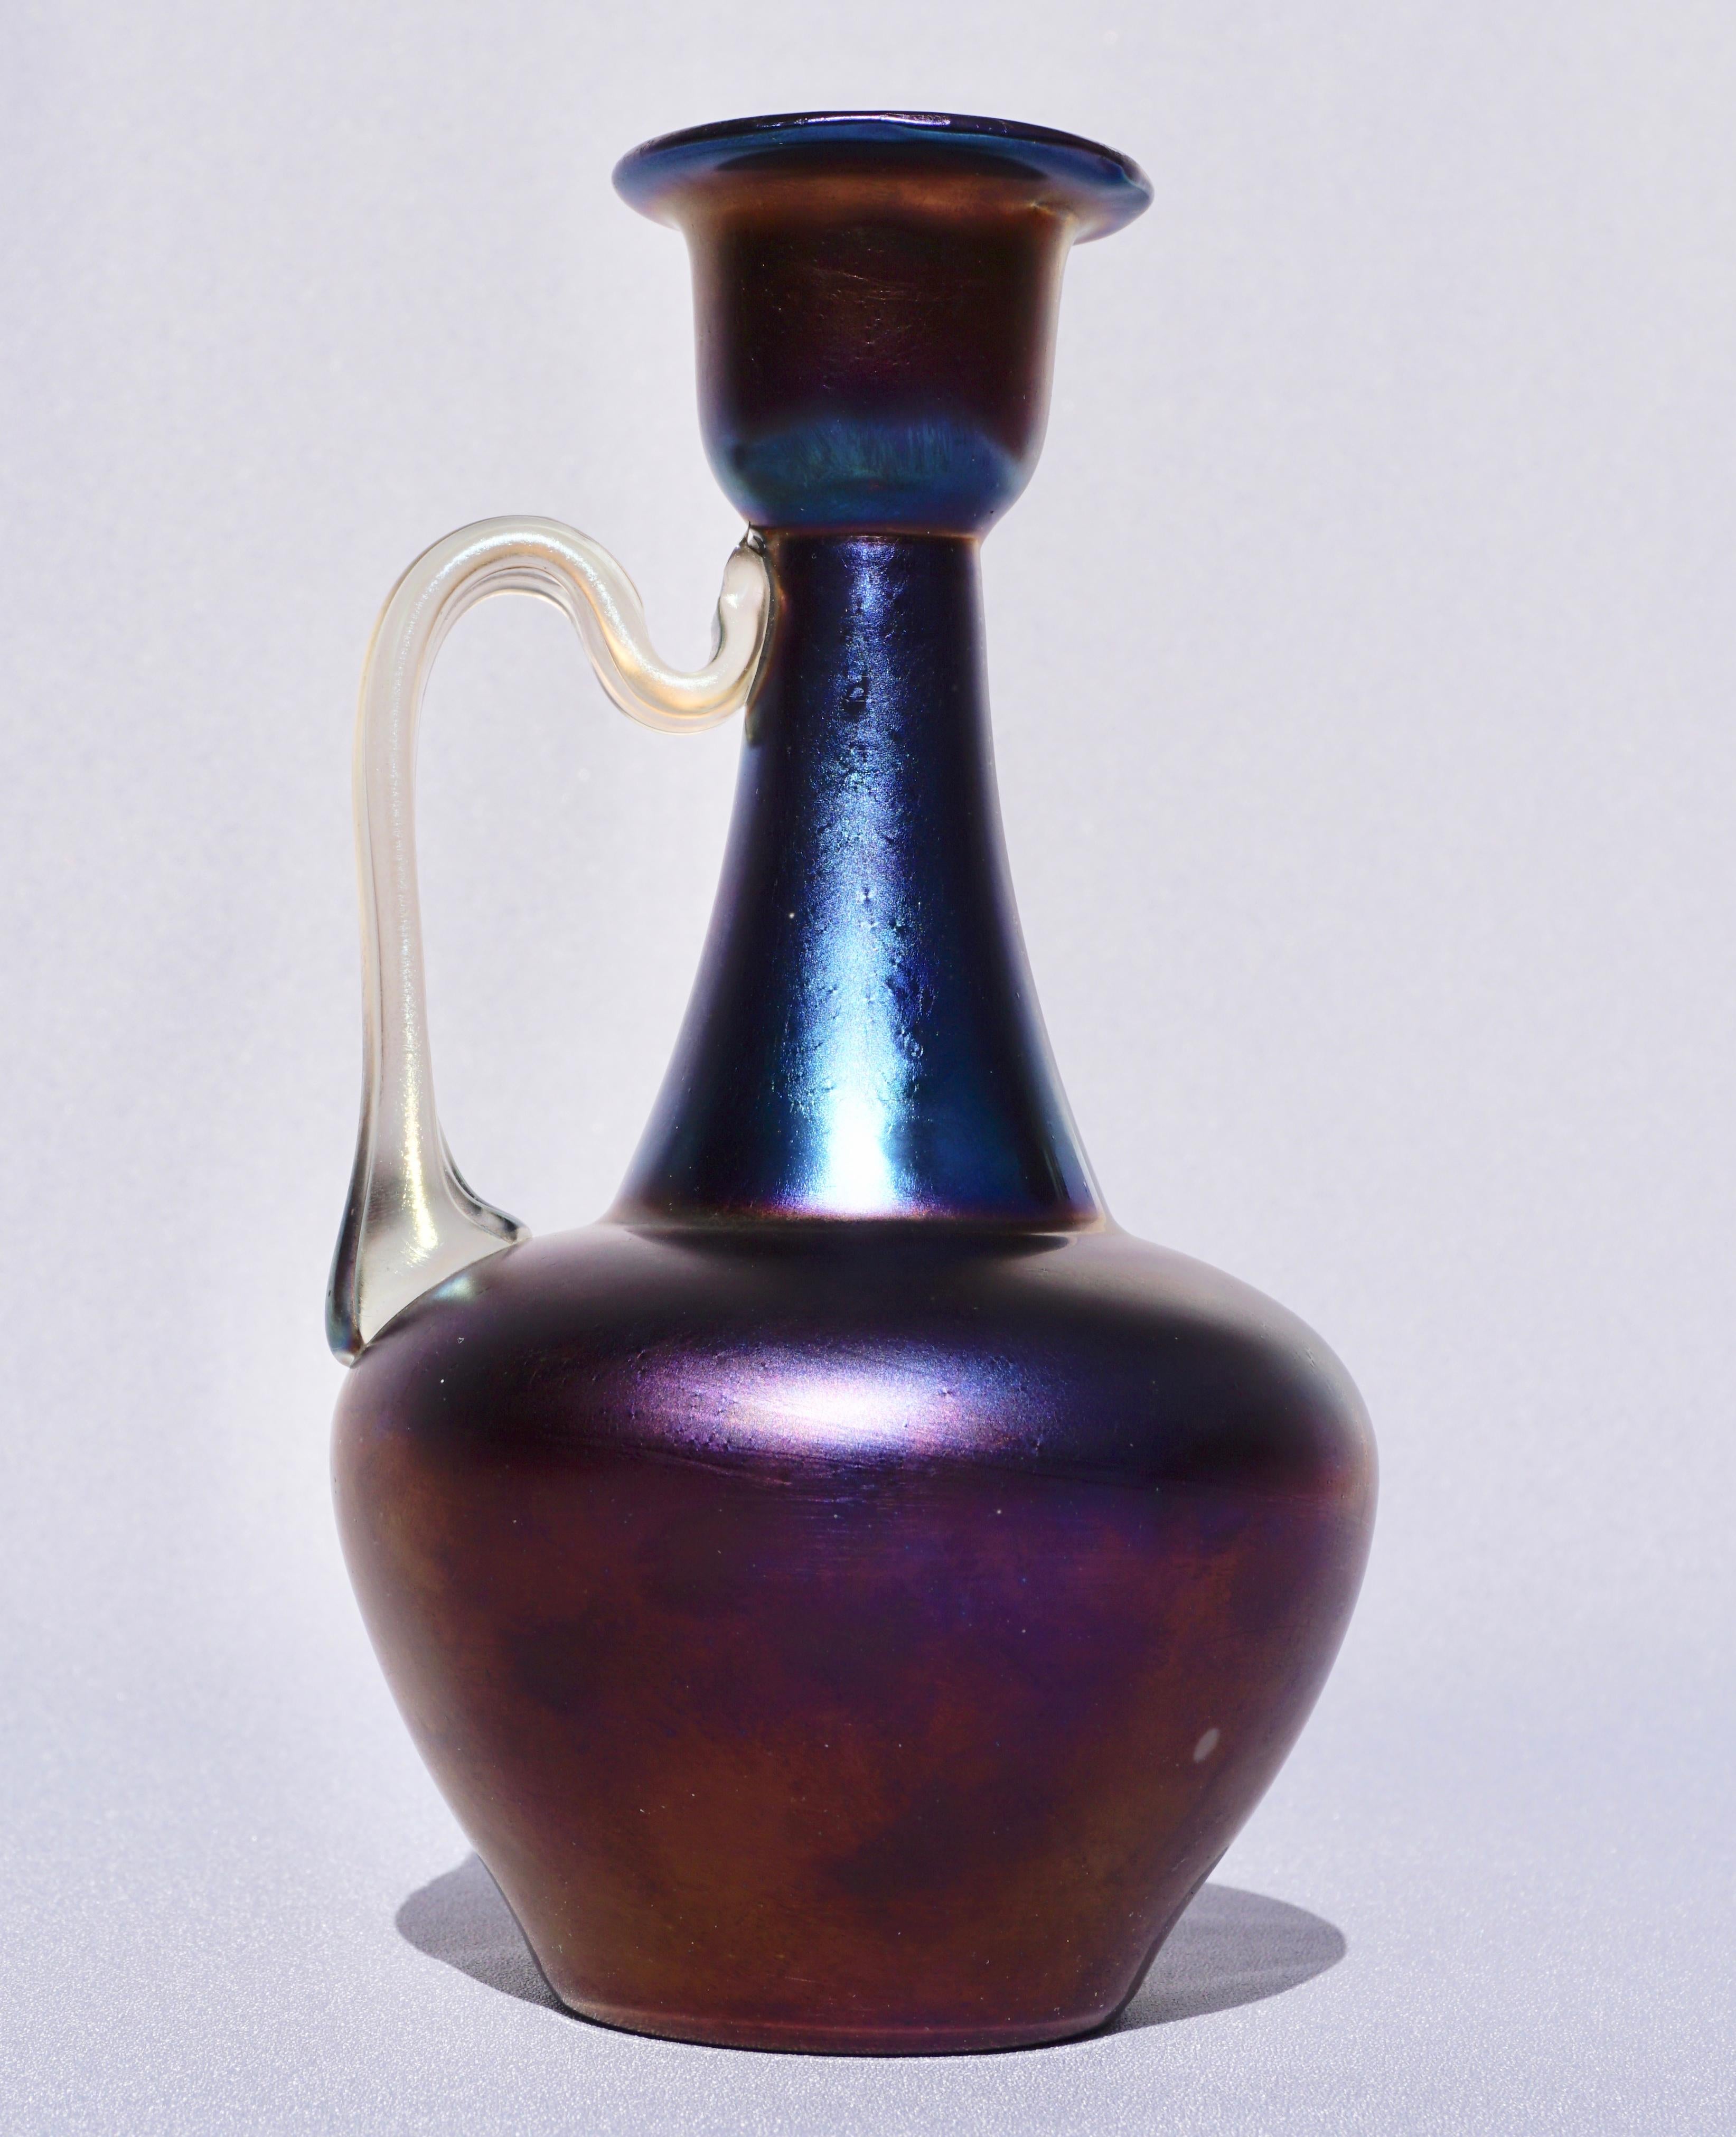 Loetz Rubin Matte Iris - 1898 (aka: rubin metall)
Registered Model: PM I-7875

Ruby ground; metallic-bronze iridescent finish (iris) with purple highlights.

Measures: Height 7.75 inches
Width 4.25 inches

Condition: Excellent

AVANTIQUES is